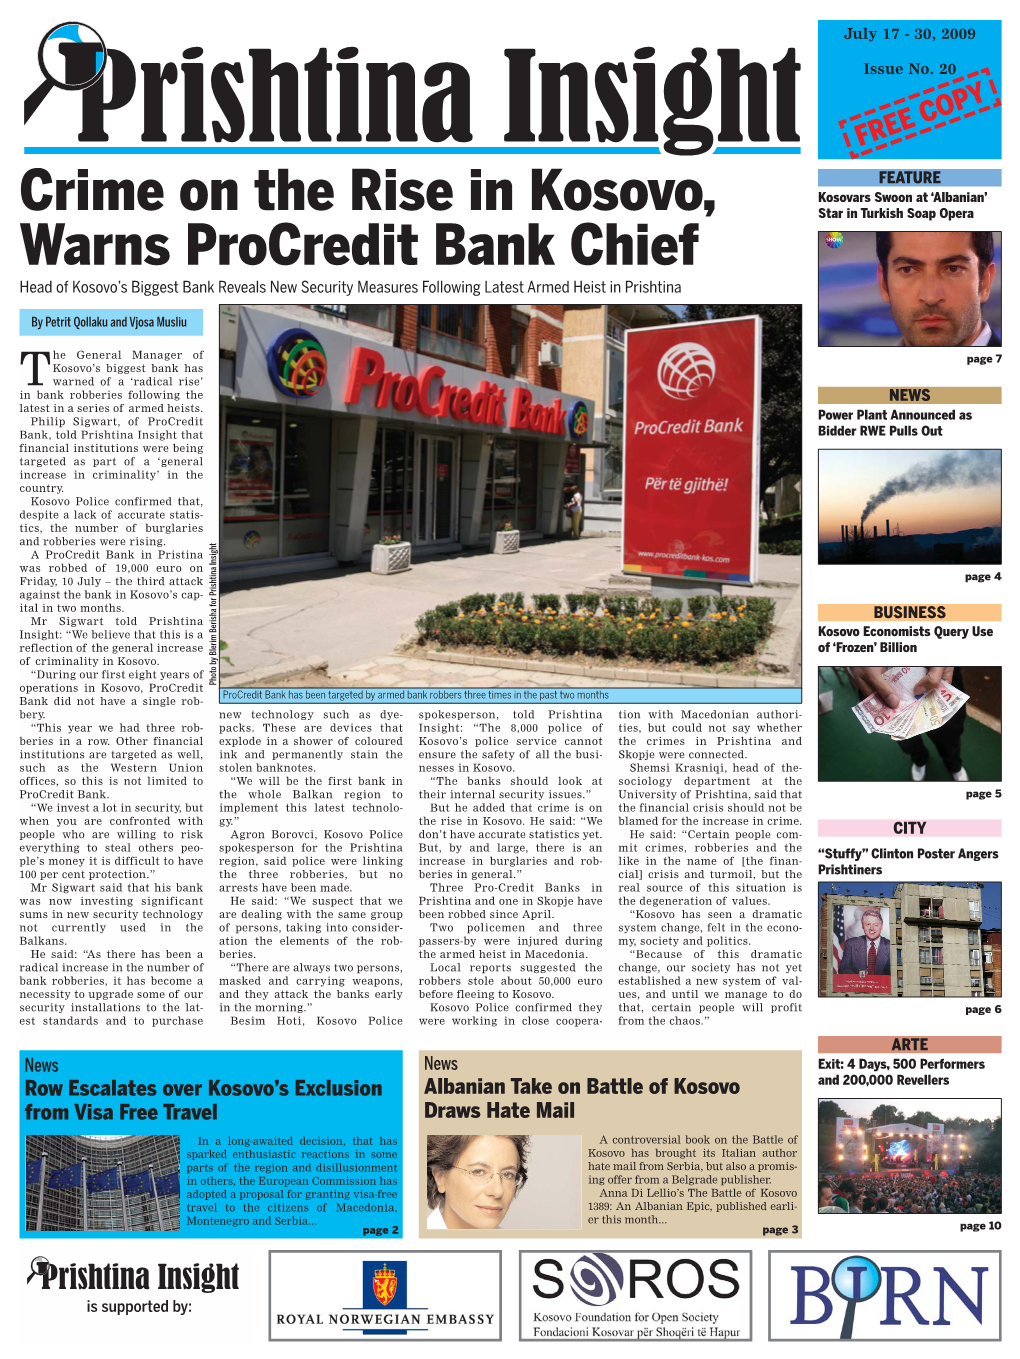 Prishtina Insight That Bidder RWE Pulls out Financial Institutions Were Being Targeted As Part of a ‘General Increase in Criminality’ in the Country